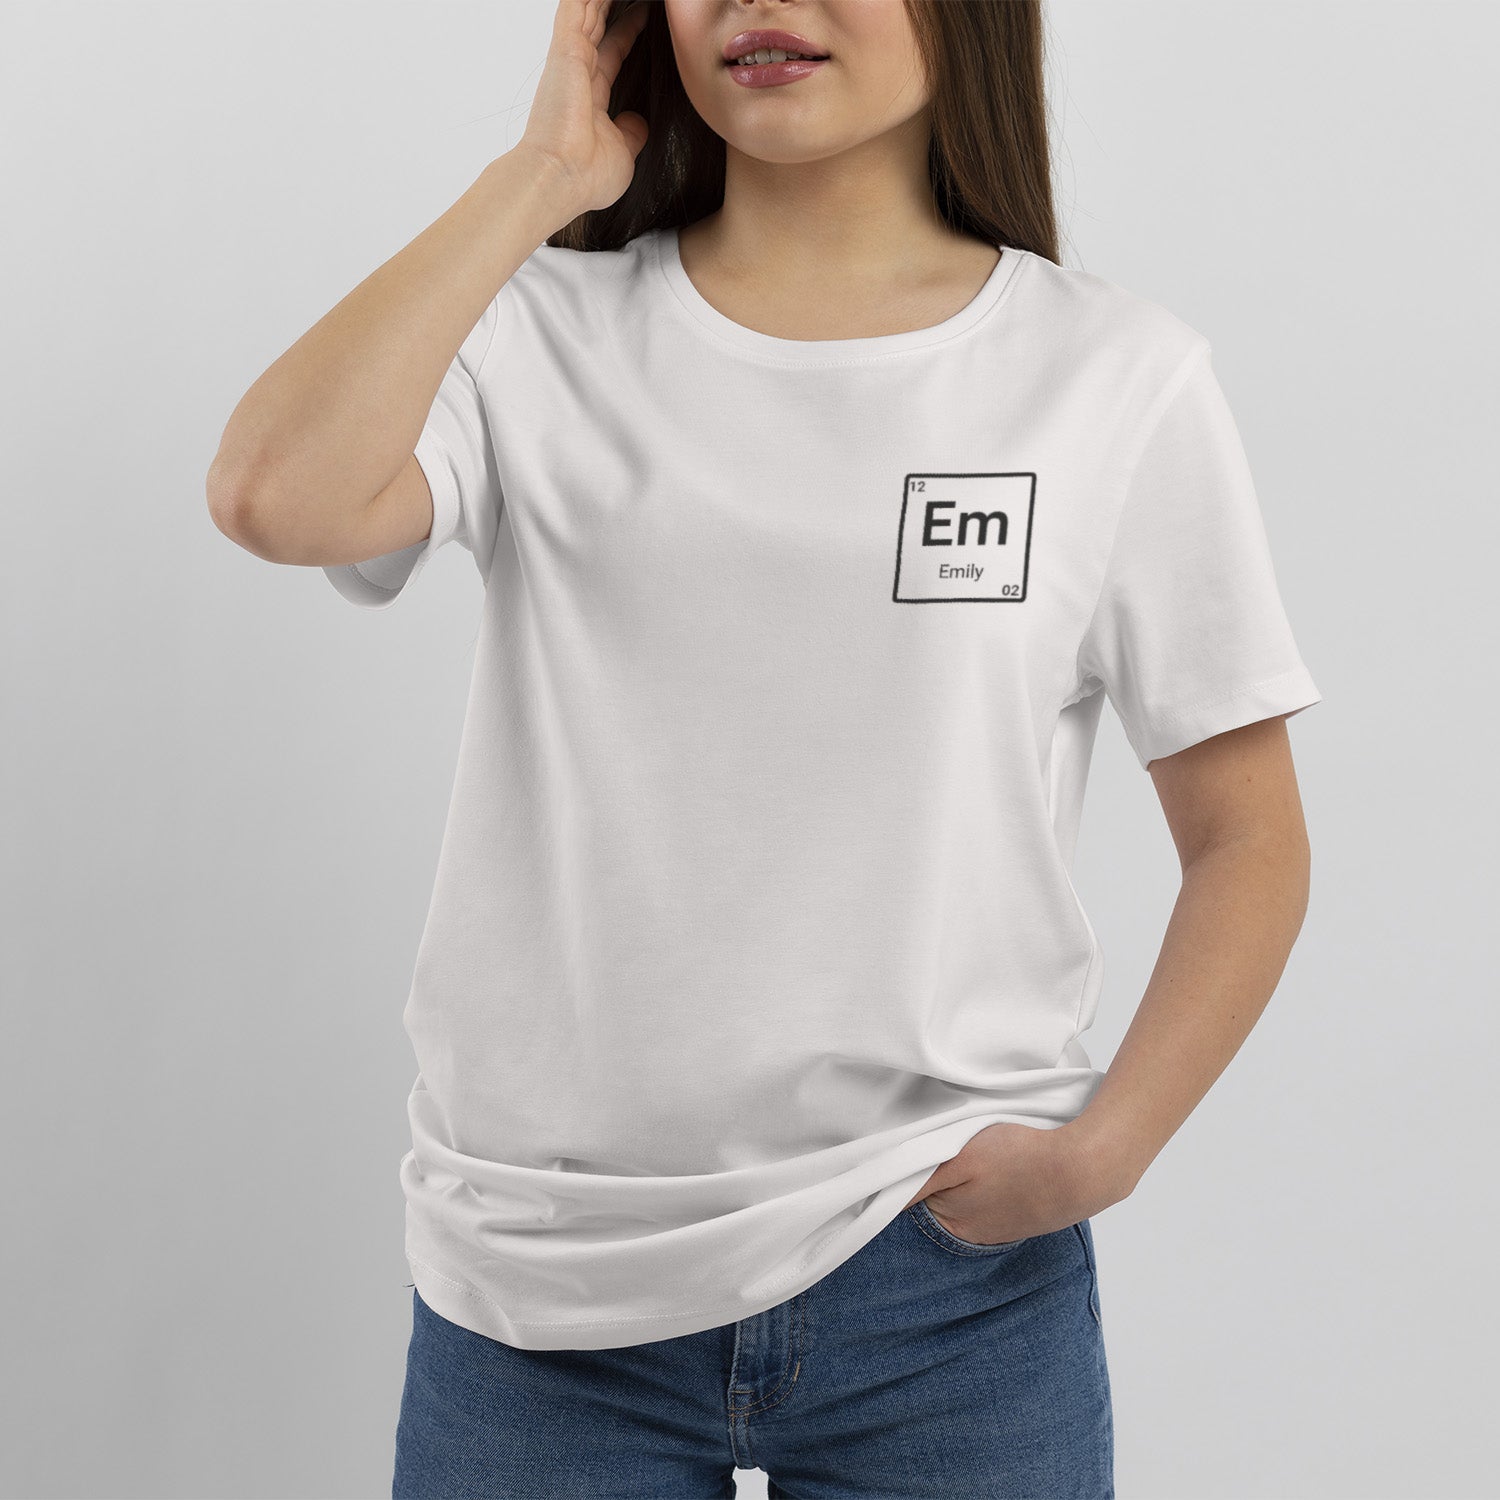 Personalisiertes T-Shirt Name Chemie Element Periodensystem